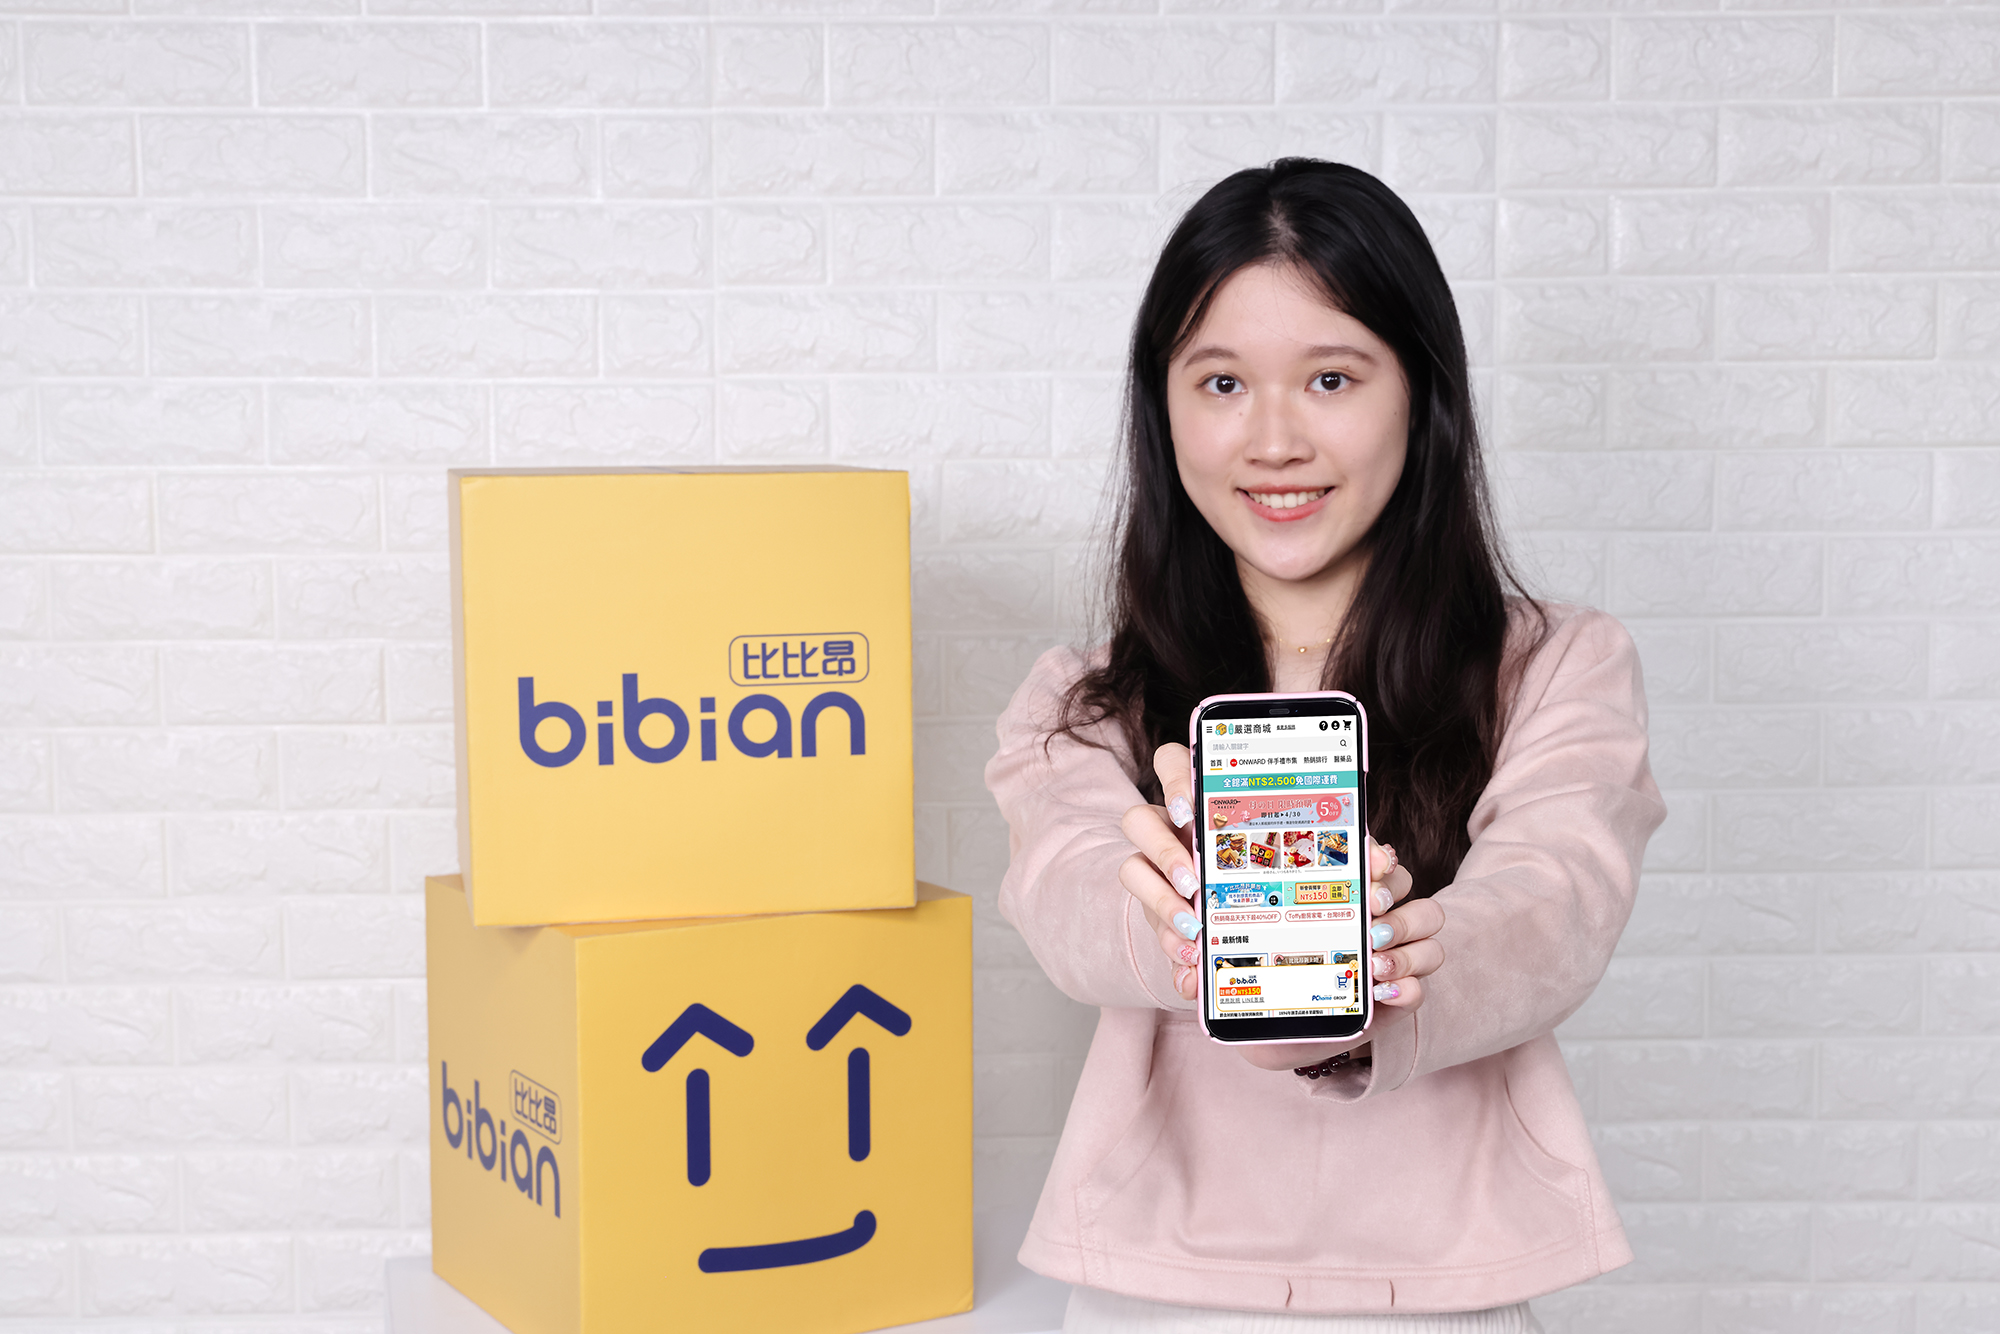 Search Volume of Mother's Day Related Products on Bibian Increases by 30% within A Week Highest Selling Gifts Are Announced and Limited-Time 5% off Offer for Mother's Day Pre-Orders Is Available!